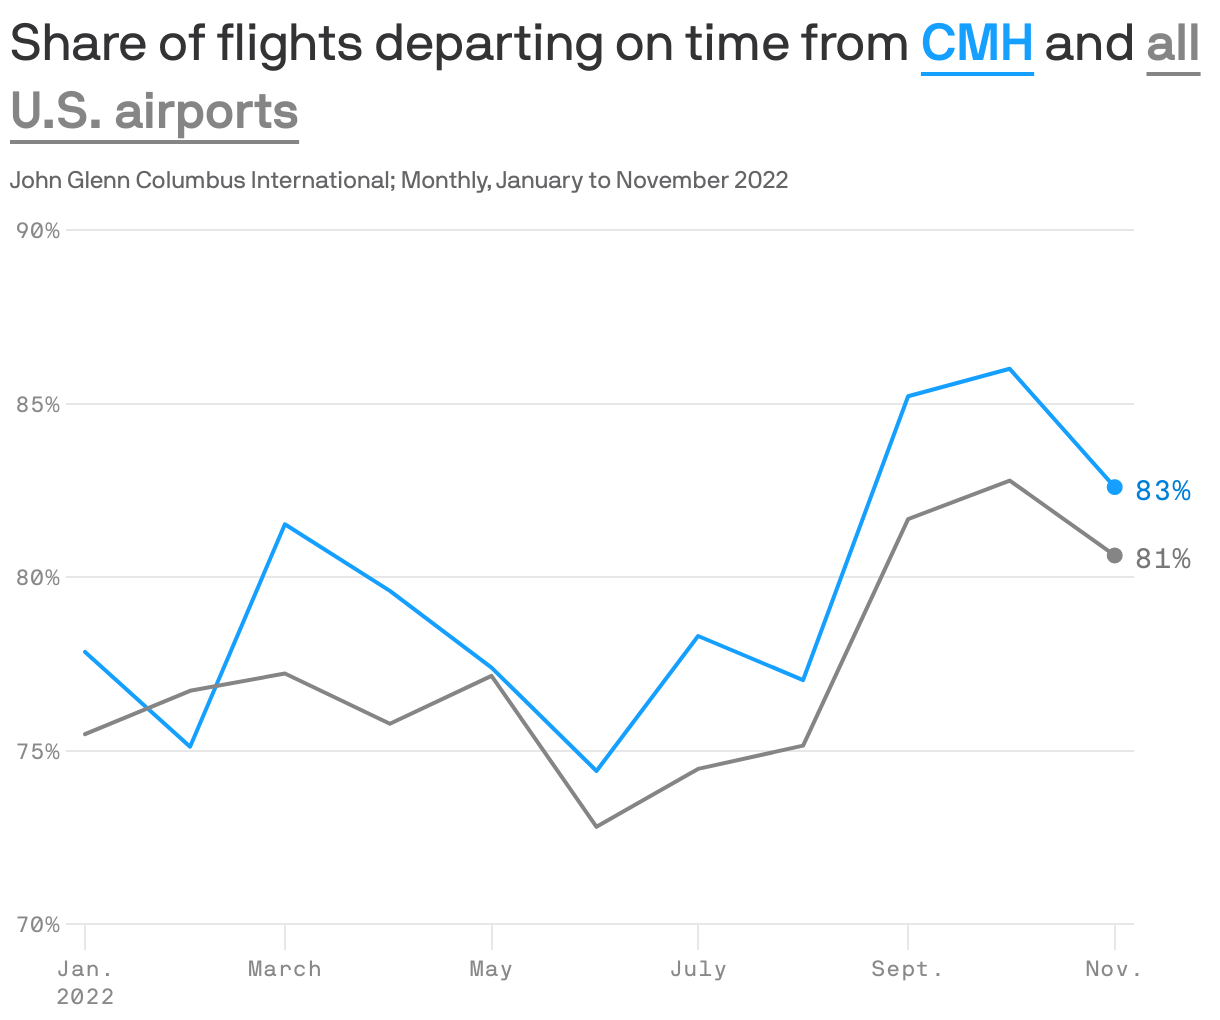 Share of flights departing on time from <b style='text-decoration: underline; text-underline-position: under; color: #15a0ff;'>CMH</b> and  <b style='text-decoration: underline; text-underline-position: under; color: #858585;'>all U.S. airports</b>